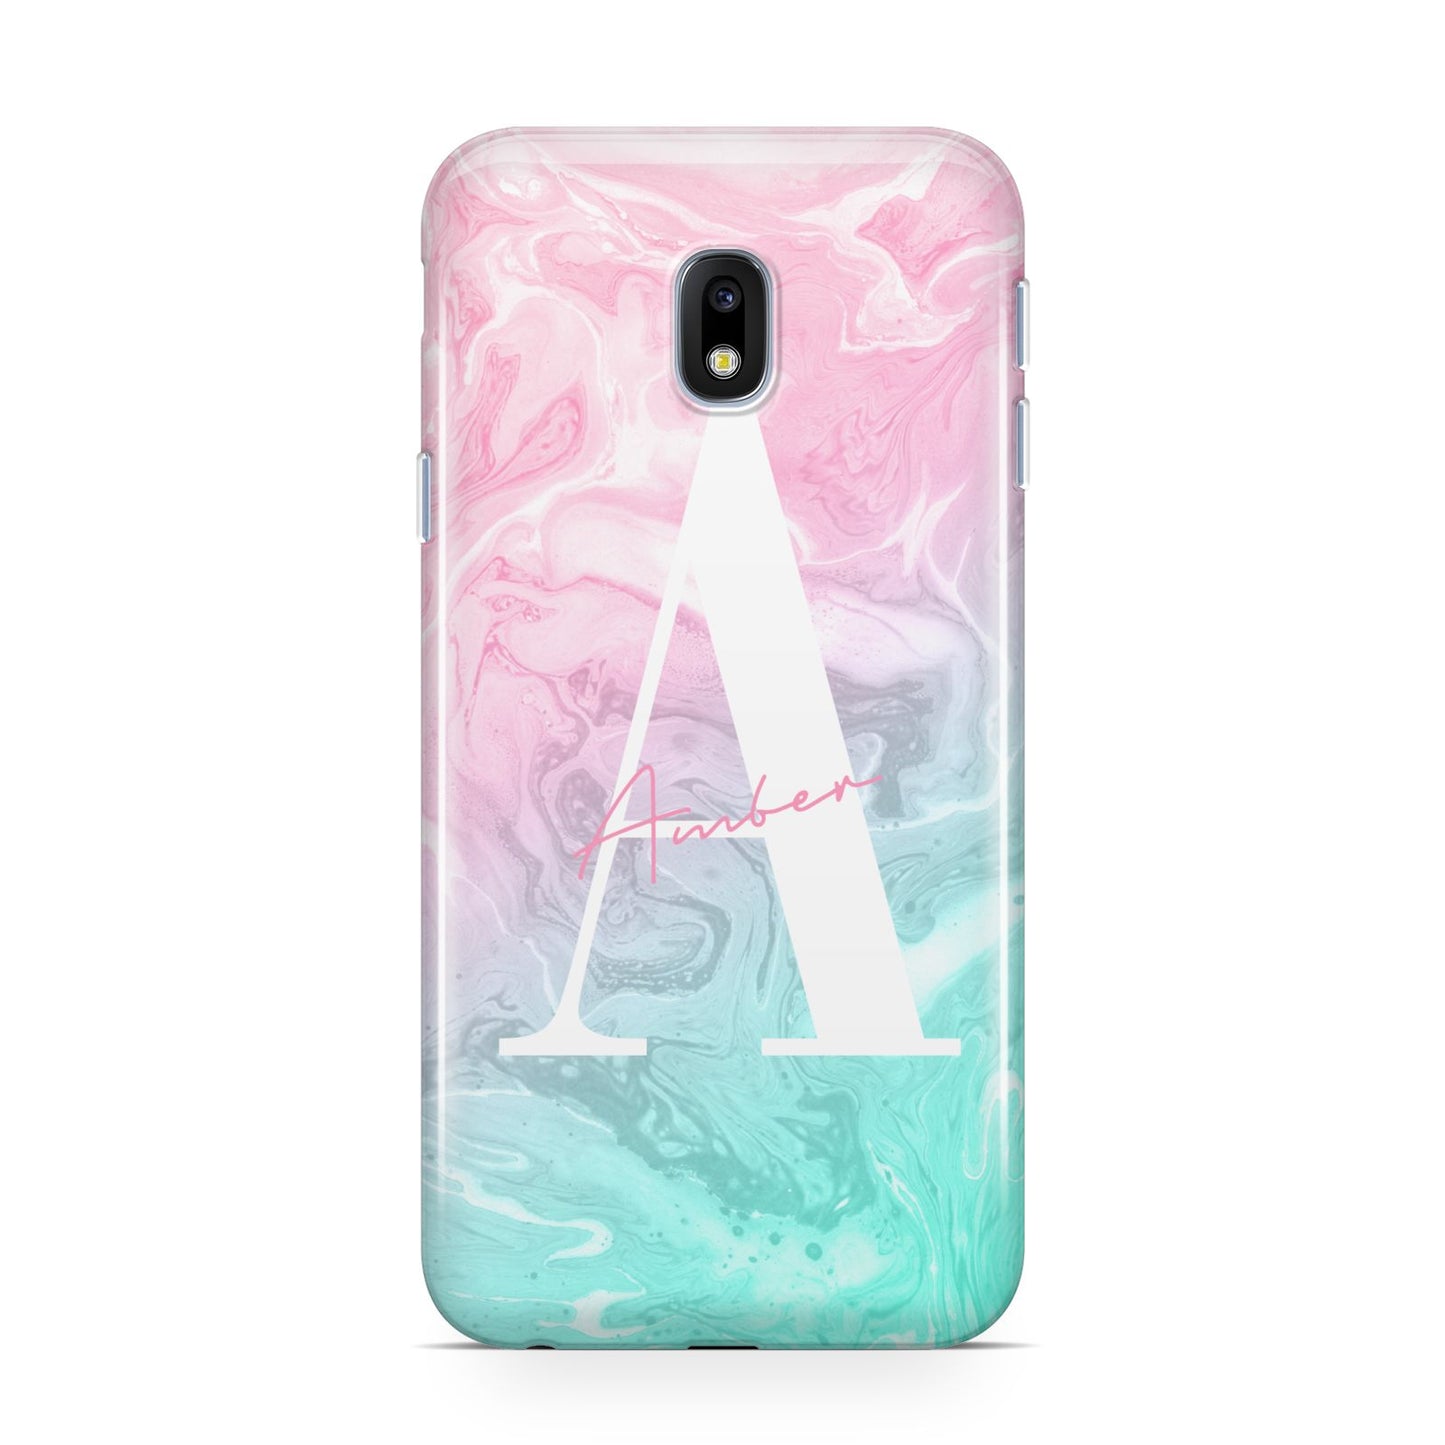 Monogrammed Pink Turquoise Pastel Marble Samsung Galaxy J3 2017 Case